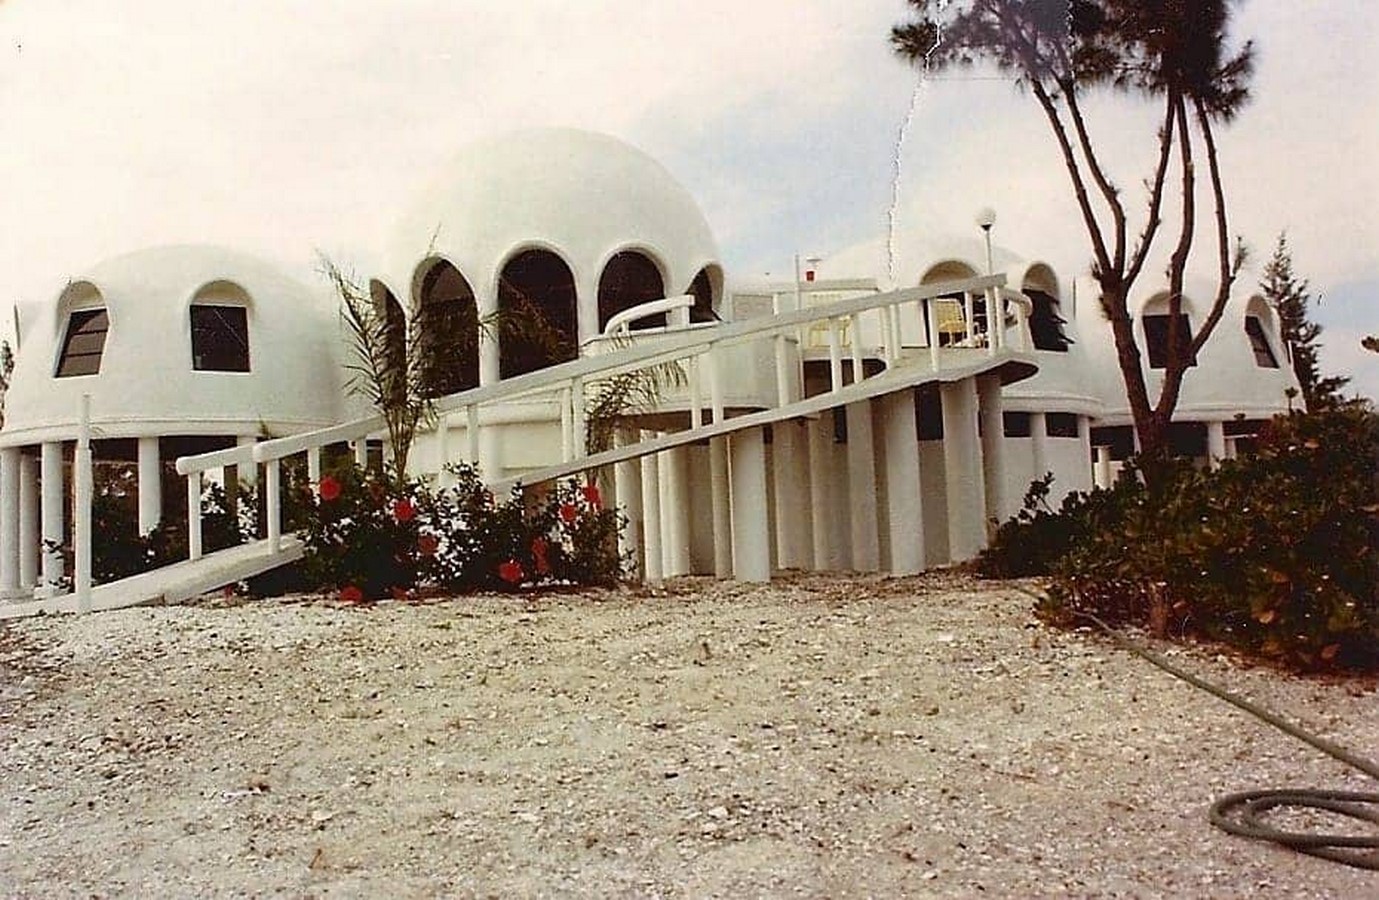 Lost in time: Dome Homes, Marco Island, Florida - Sheet4